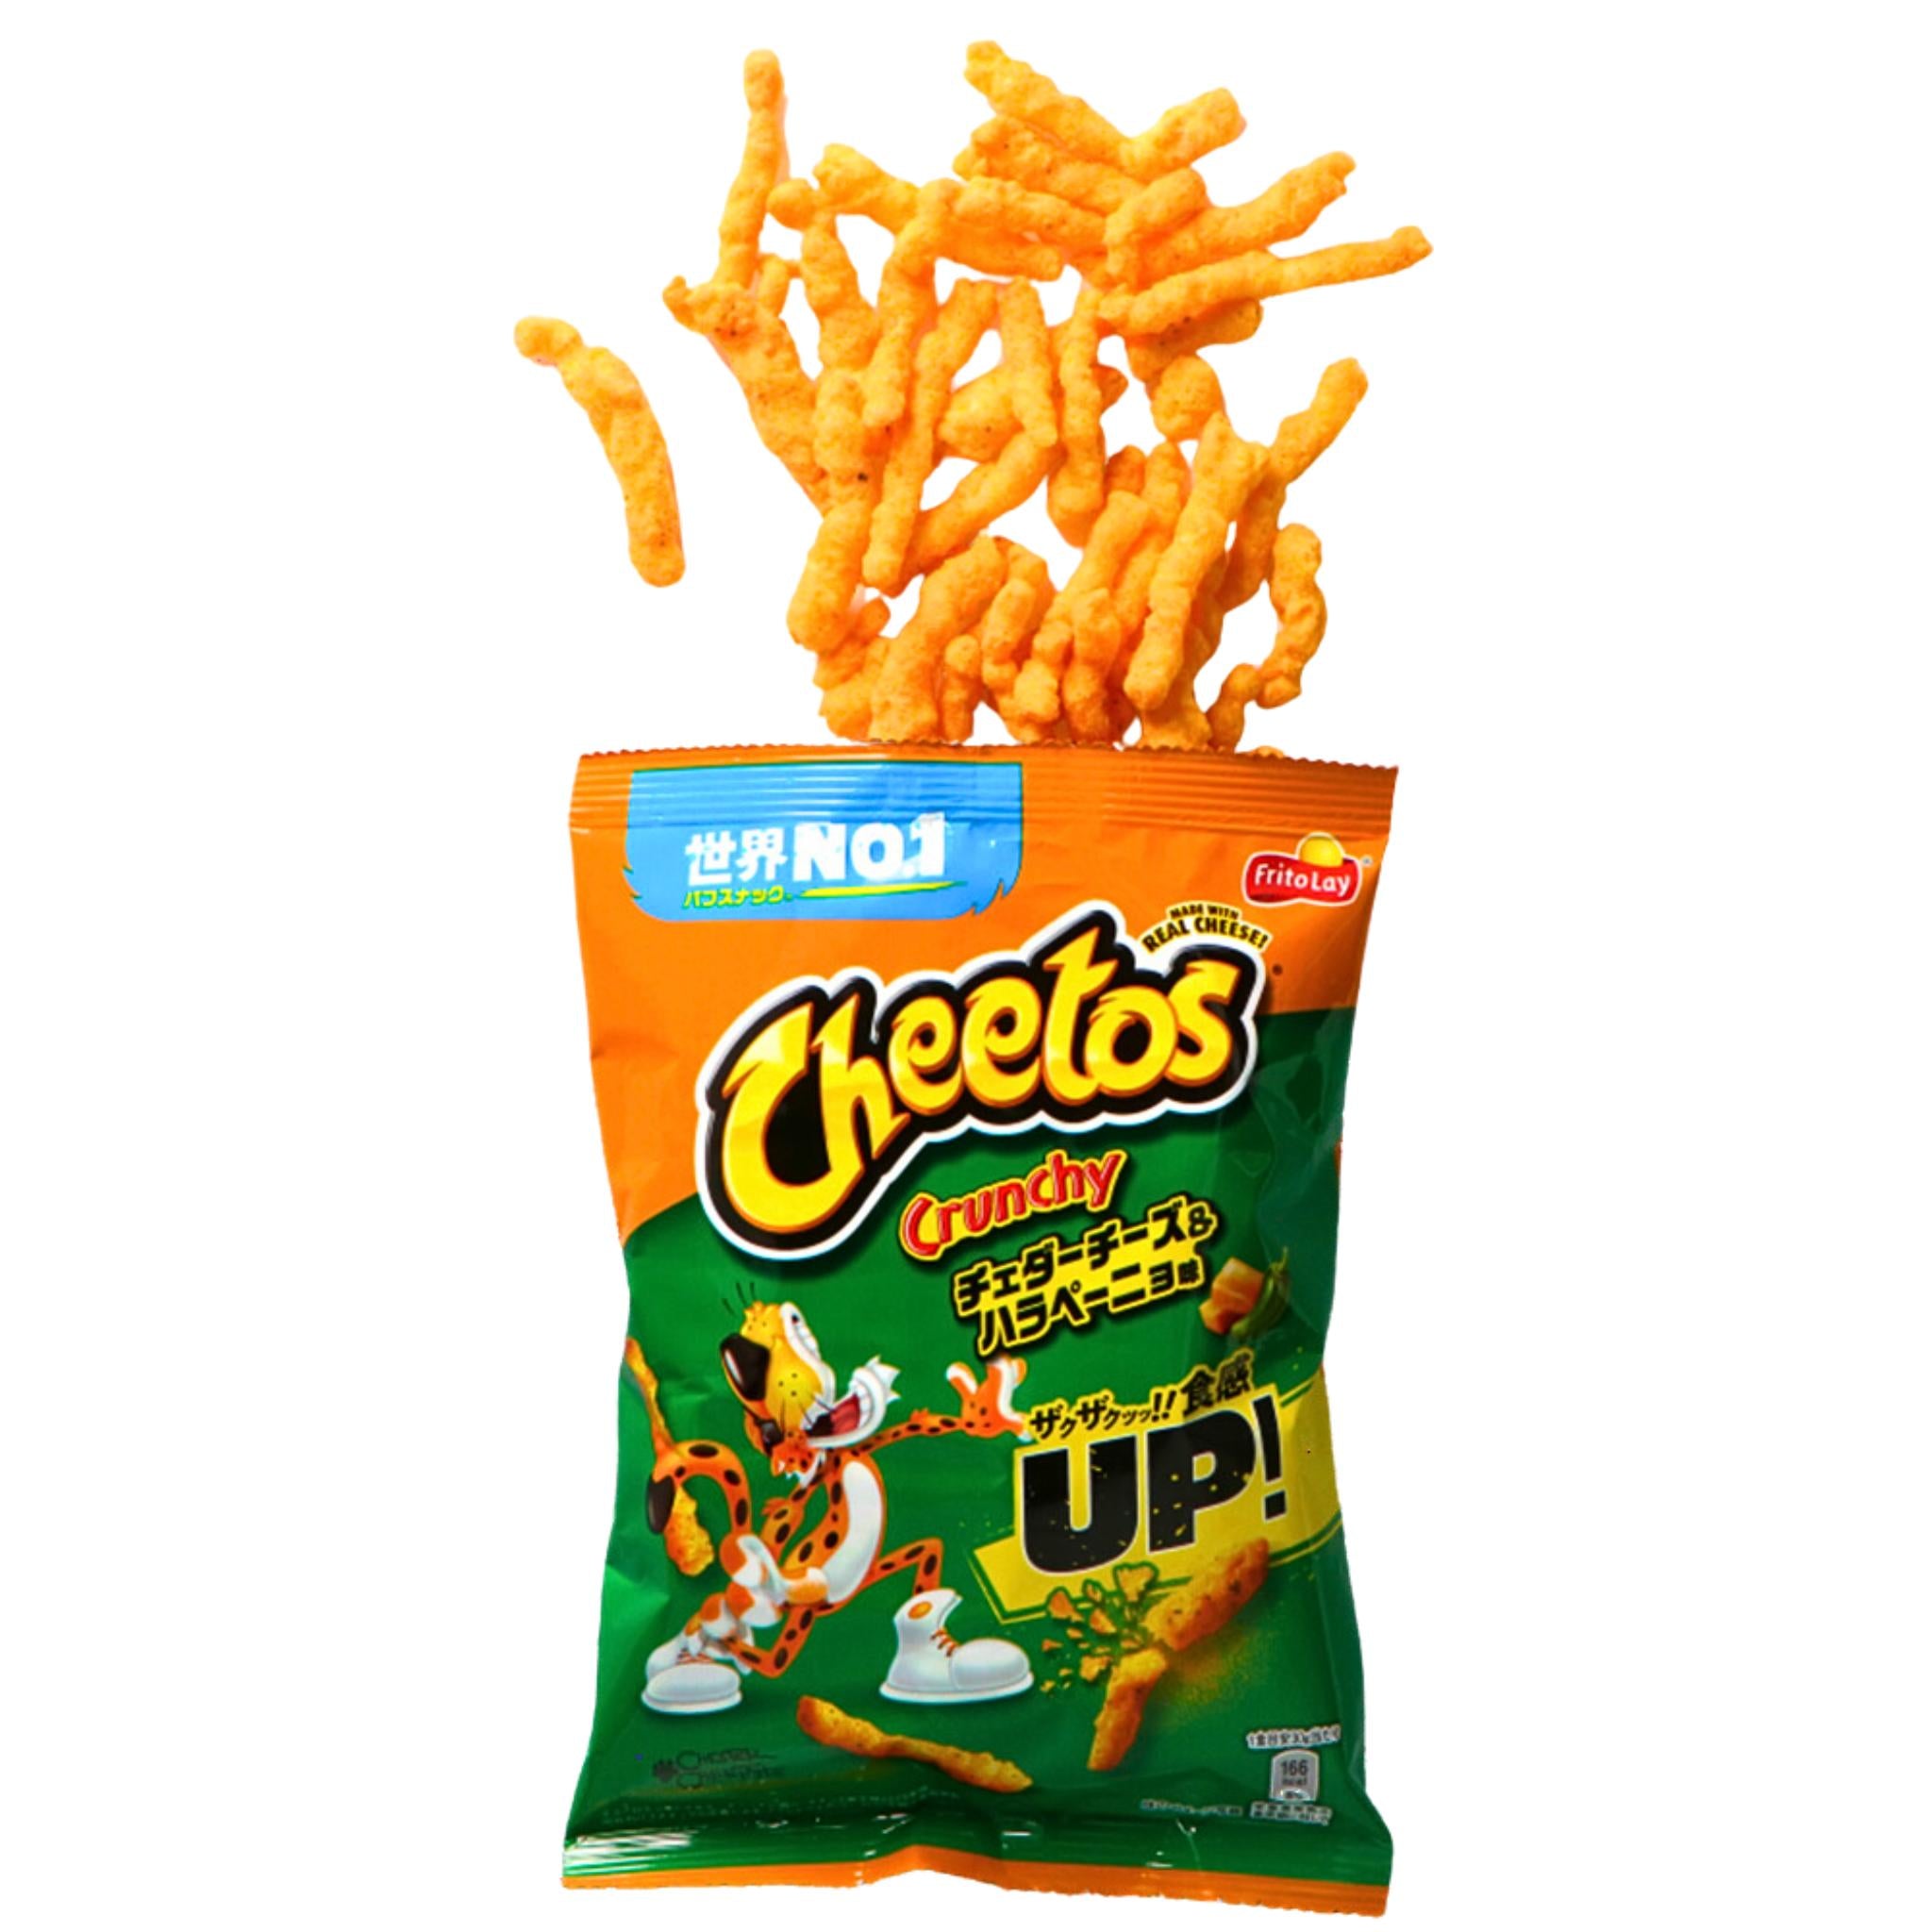 Cheetos Crunchy Cheddar Cheese & Jalapeno - 75g (JAPANS)